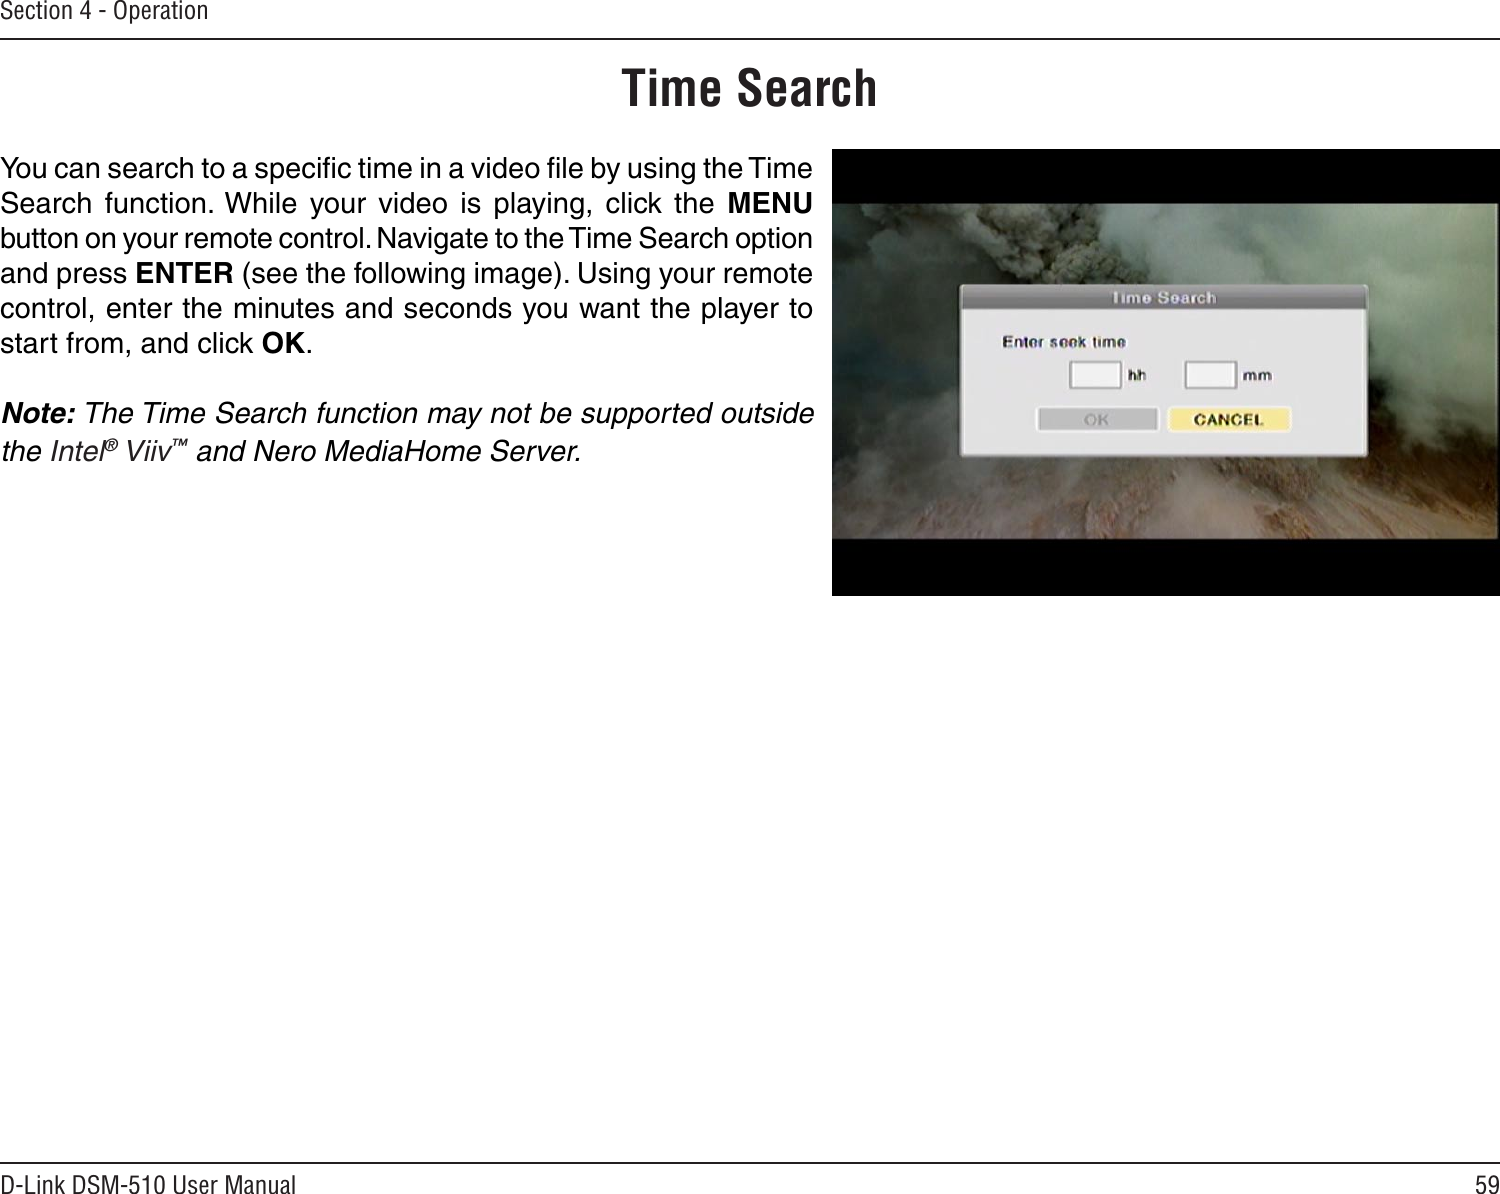 59D-Link DSM-510 User ManualSection 4 - OperationYou can search to a speciﬁc time in a video ﬁle by using the Time Search  function. While  your  video  is  playing,  click  the  MENU button on your remote control. Navigate to the Time Search option and press ENTER (see the following image). Using your remote control, enter the minutes and seconds you want the player to start from, and click OK.Note: The Time Search function may not be supported outside the Intel® Viiv™ and Nero MediaHome Server.Time Search